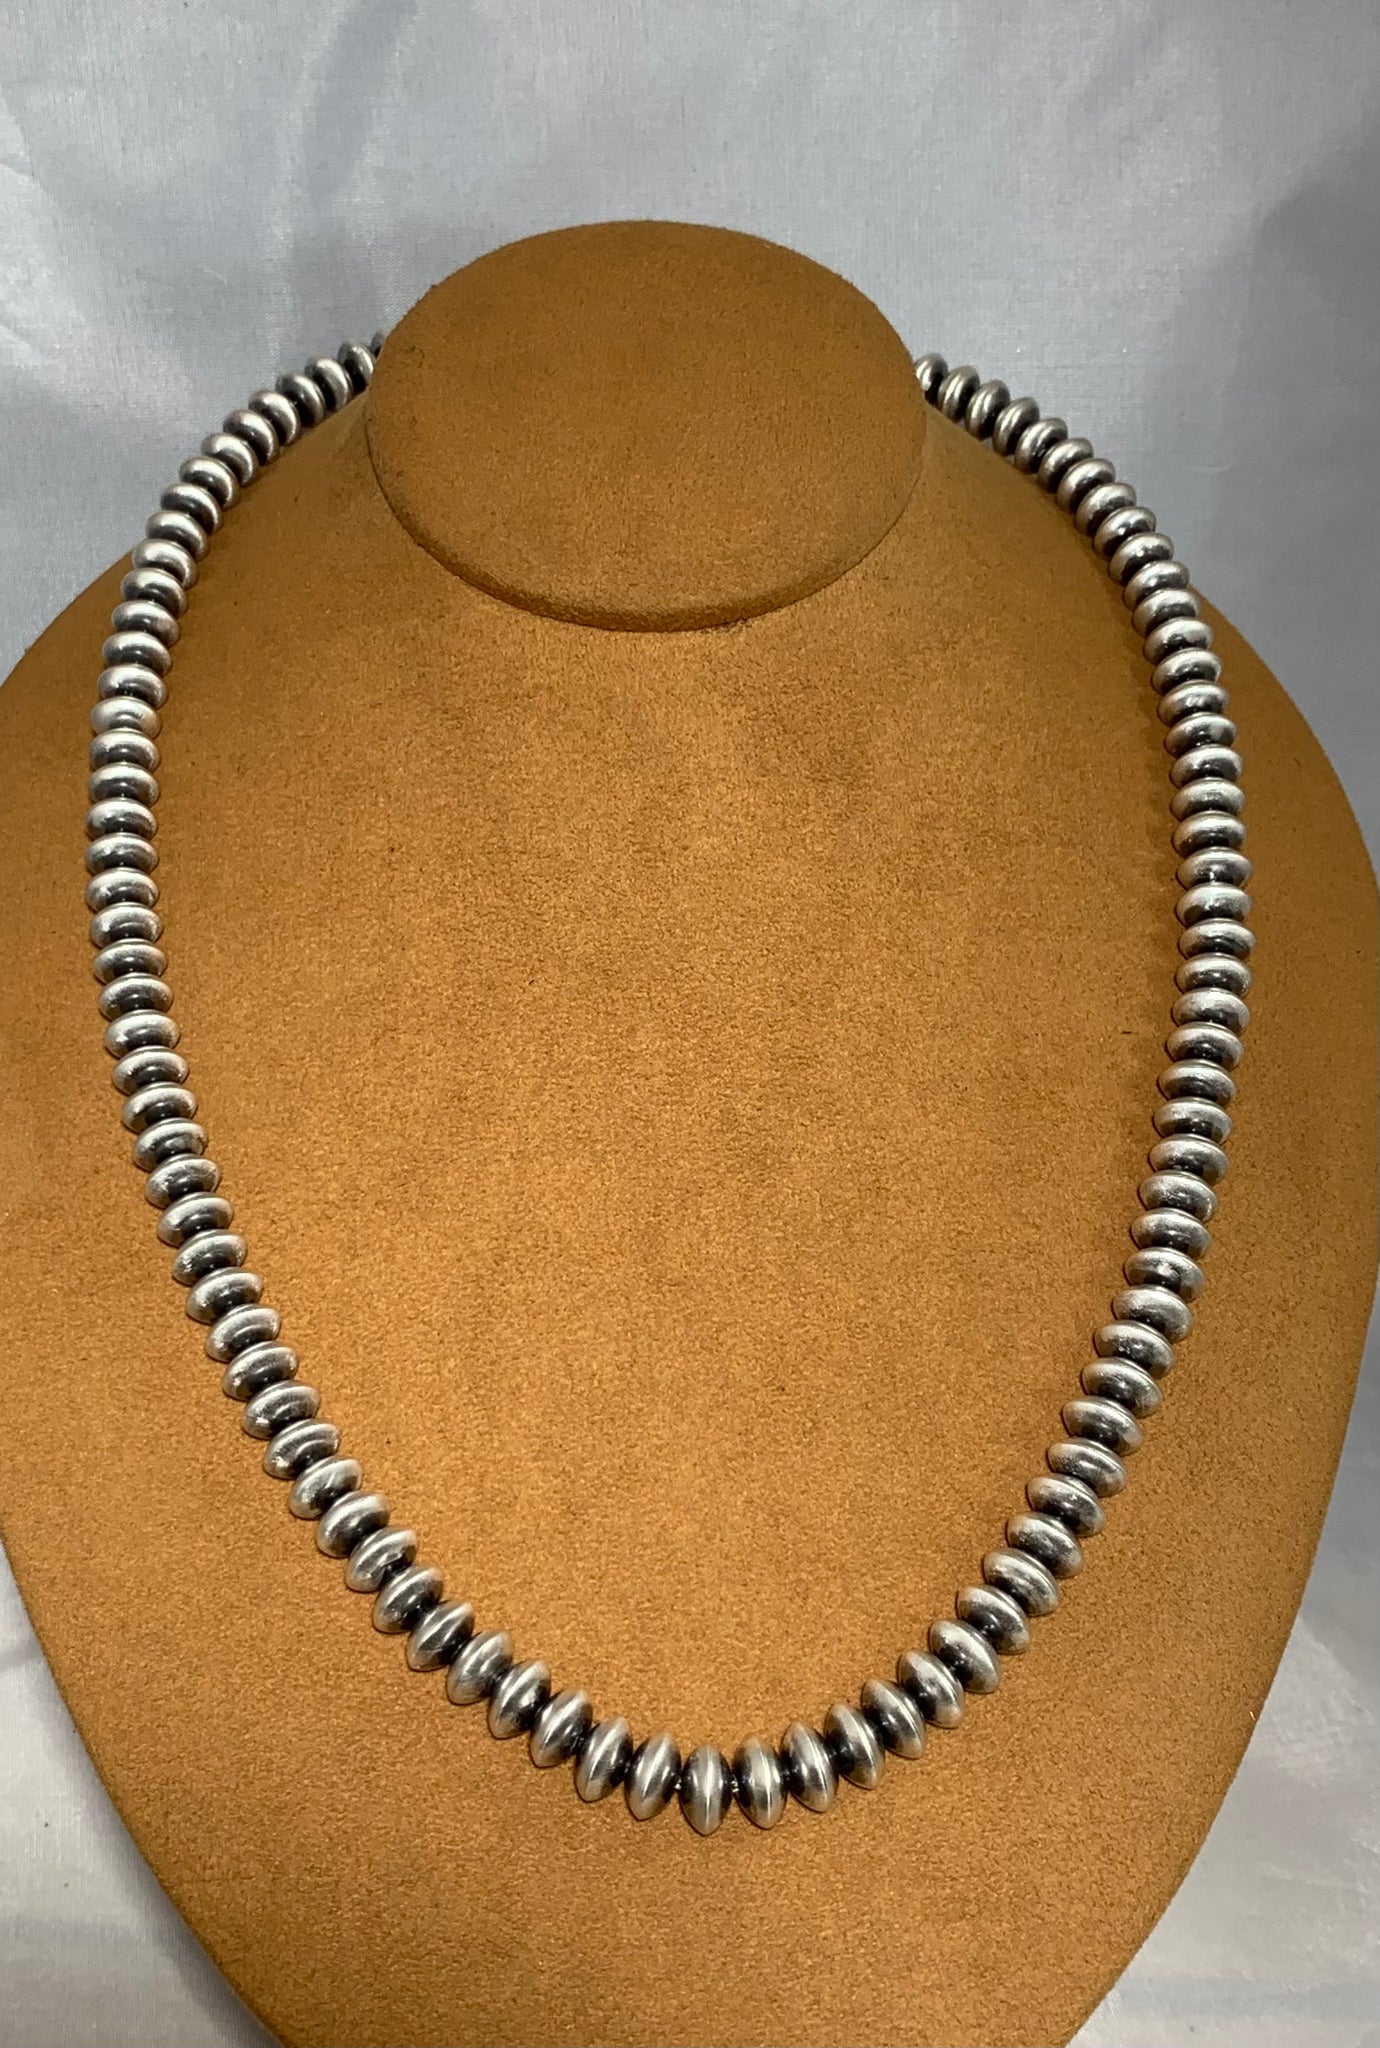 24" Flat Bead Old Fashioned Navajo Bead Necklace by Ruby Haley (Copy)